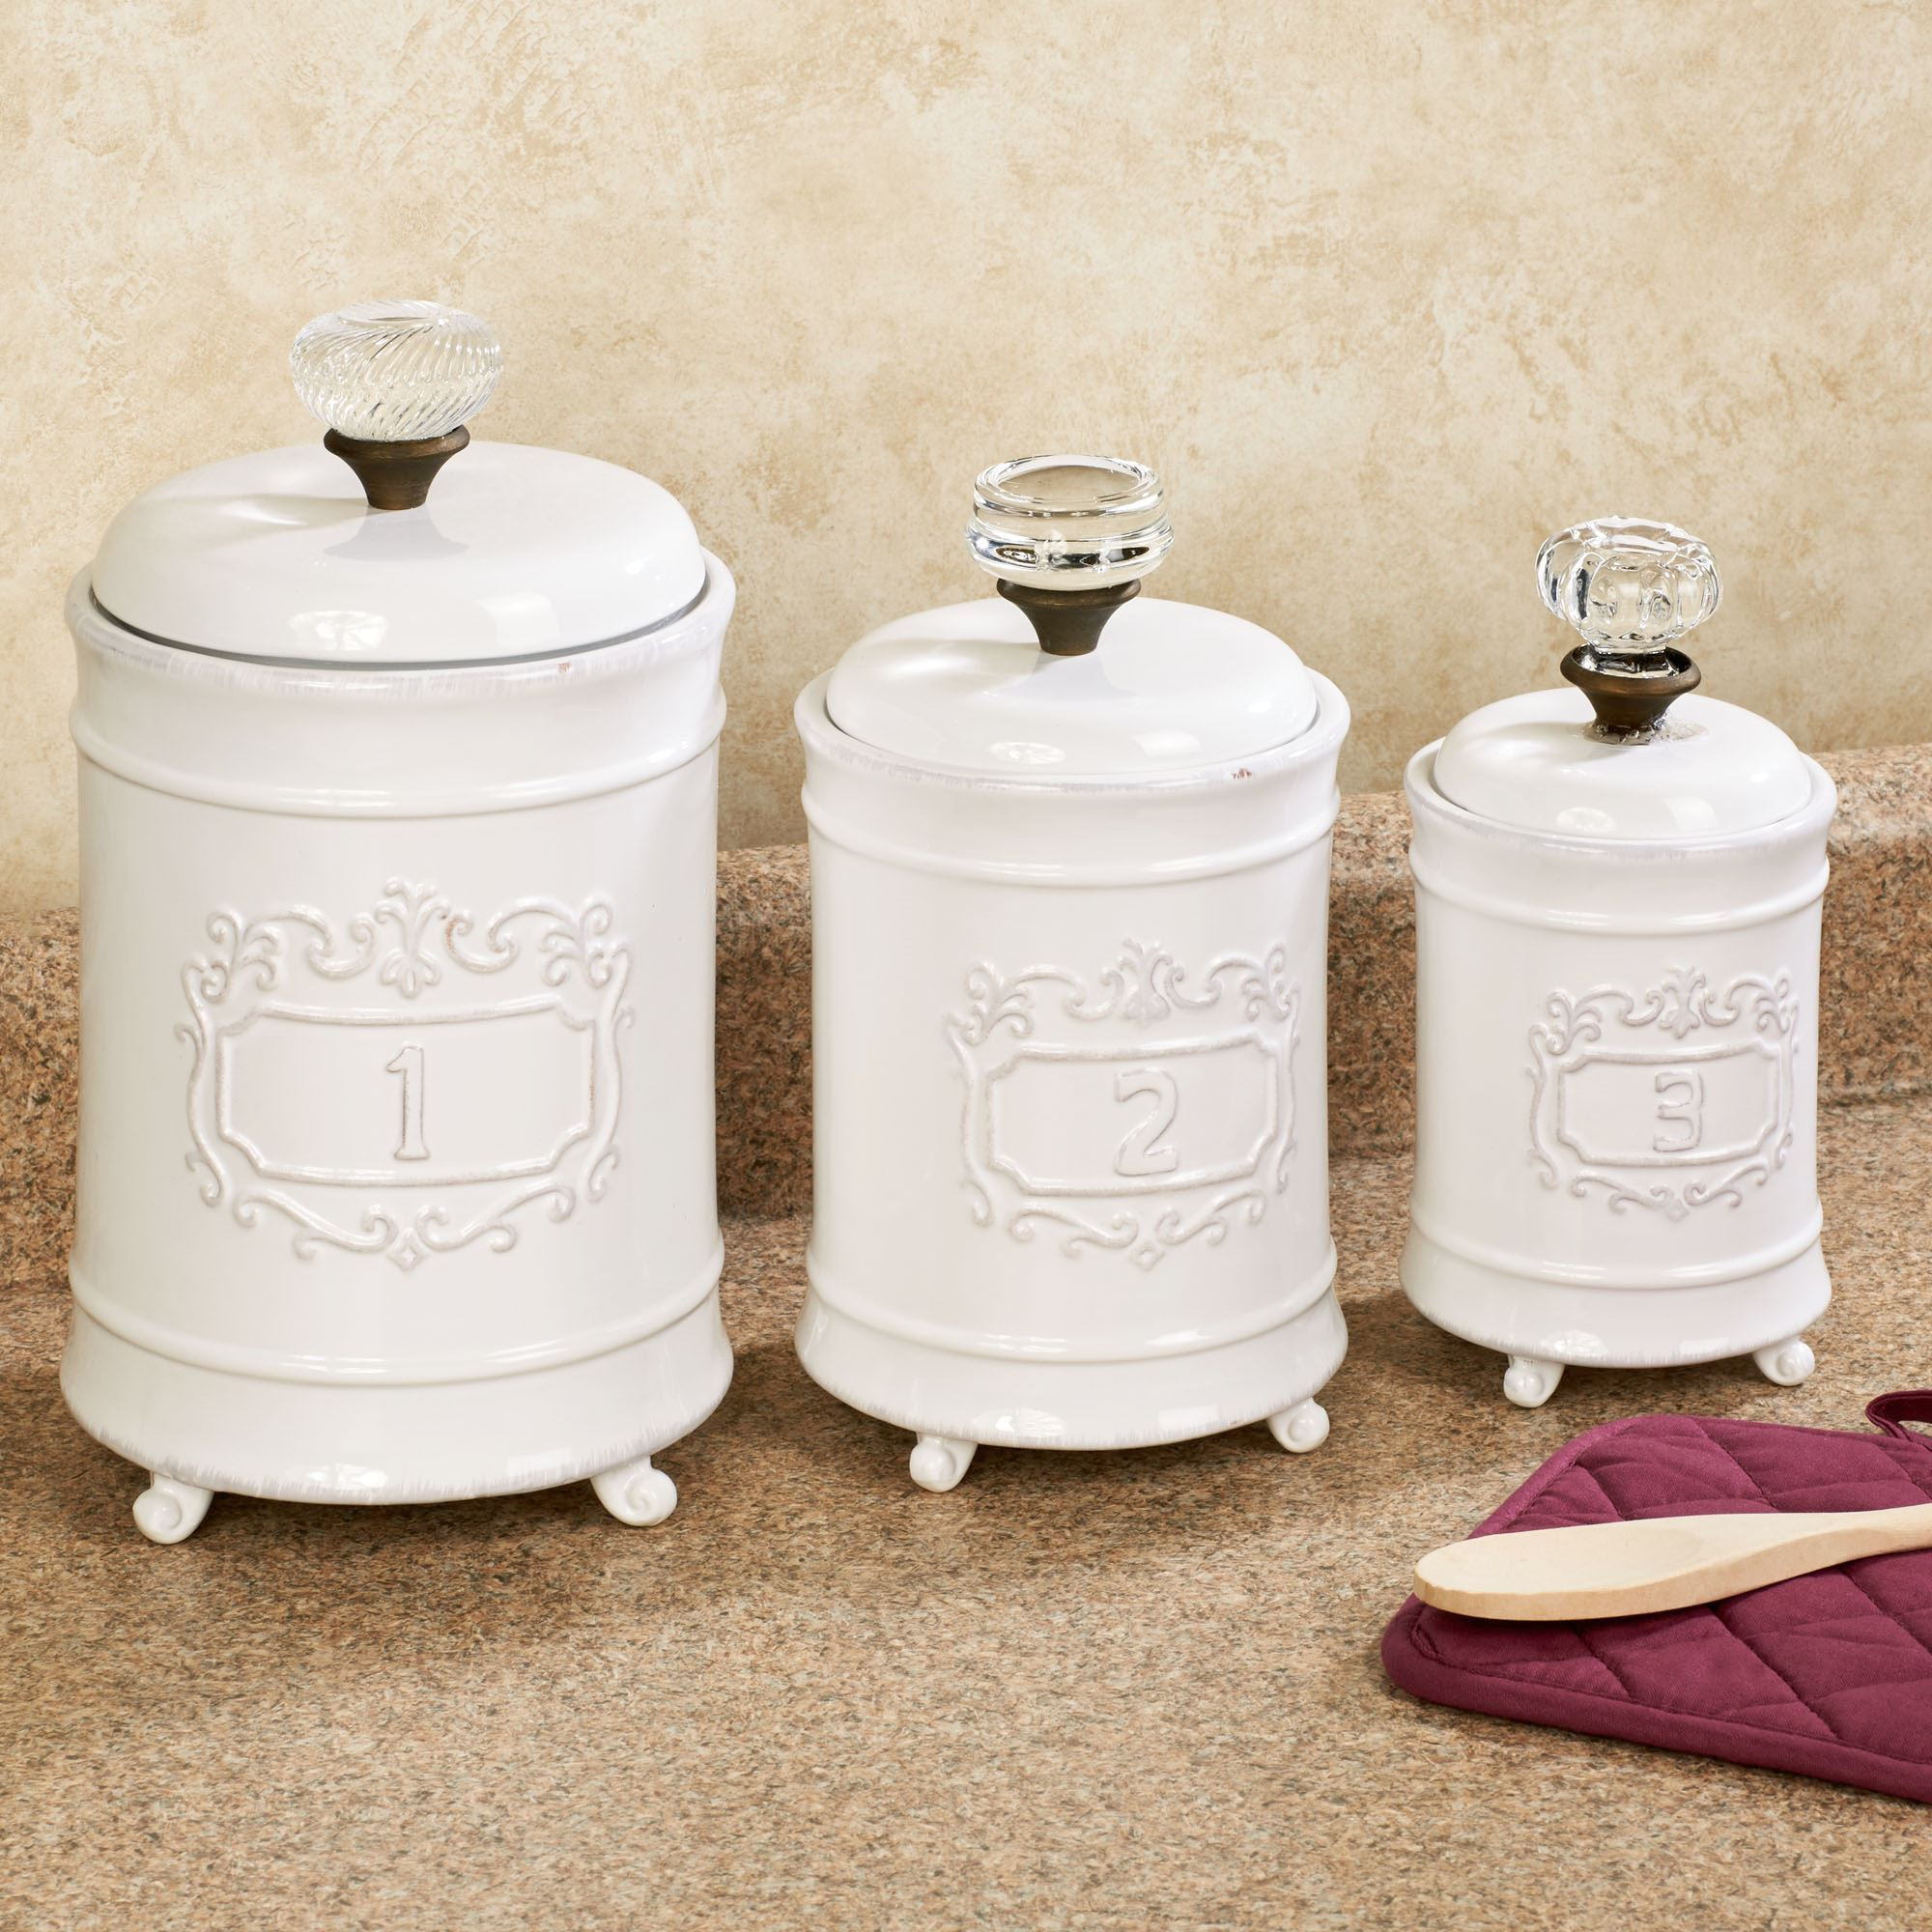 23 Lovely White Kitchen Canisters Home Decoration And Inspiration Ideas